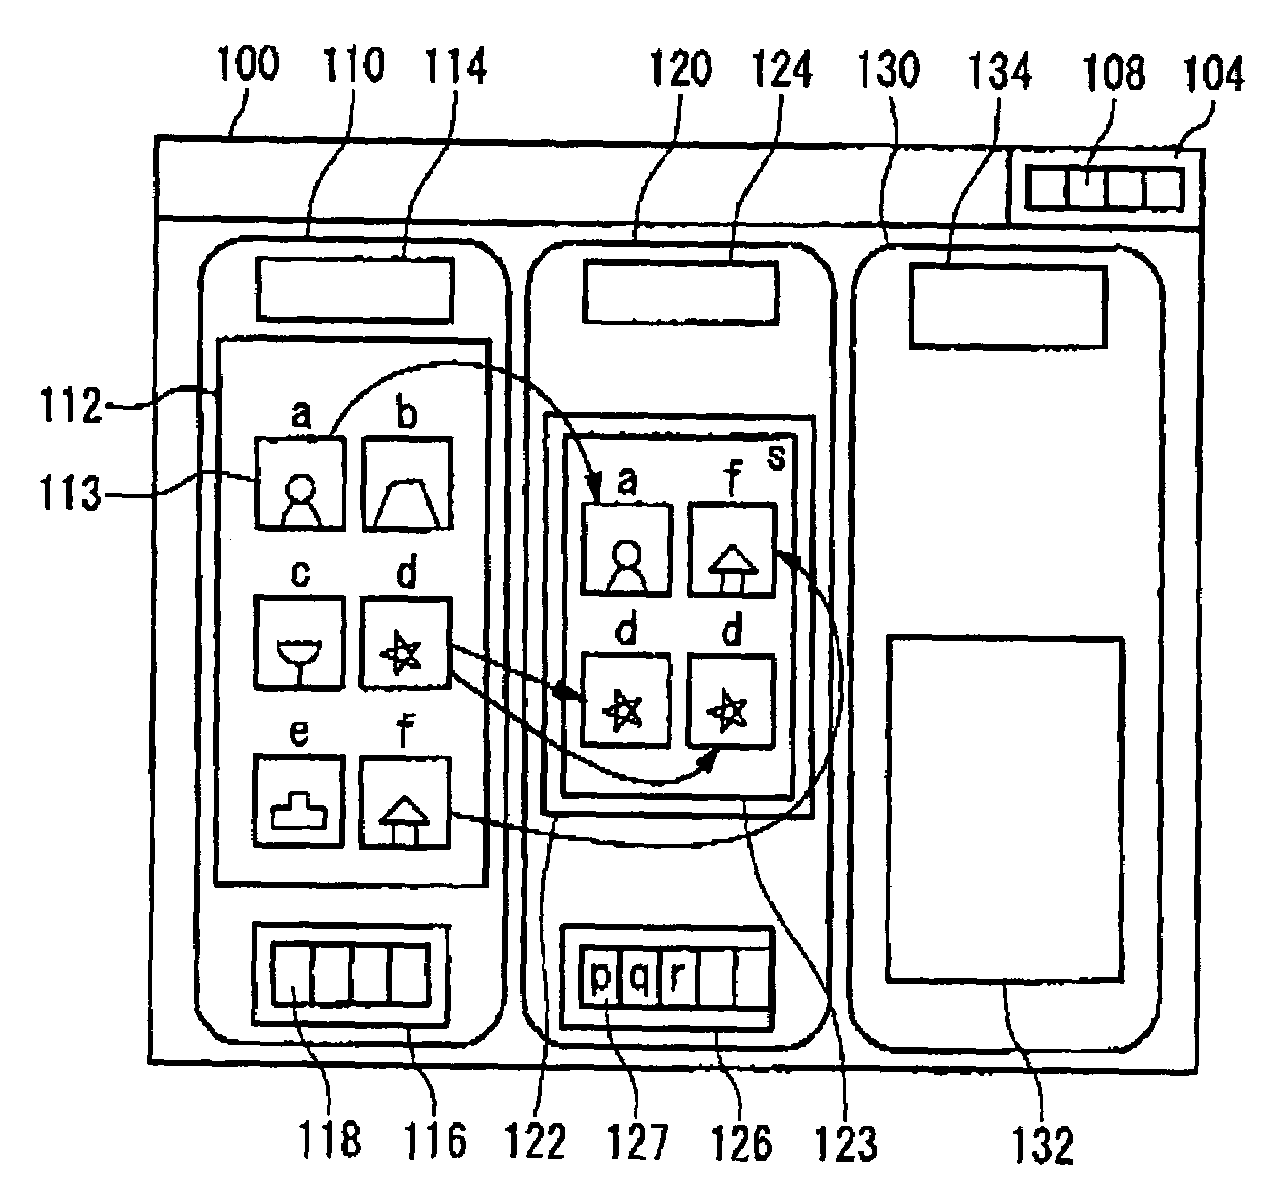 User interface apparatus, method, and computer readable recording medium for interacting with child windows in an application window